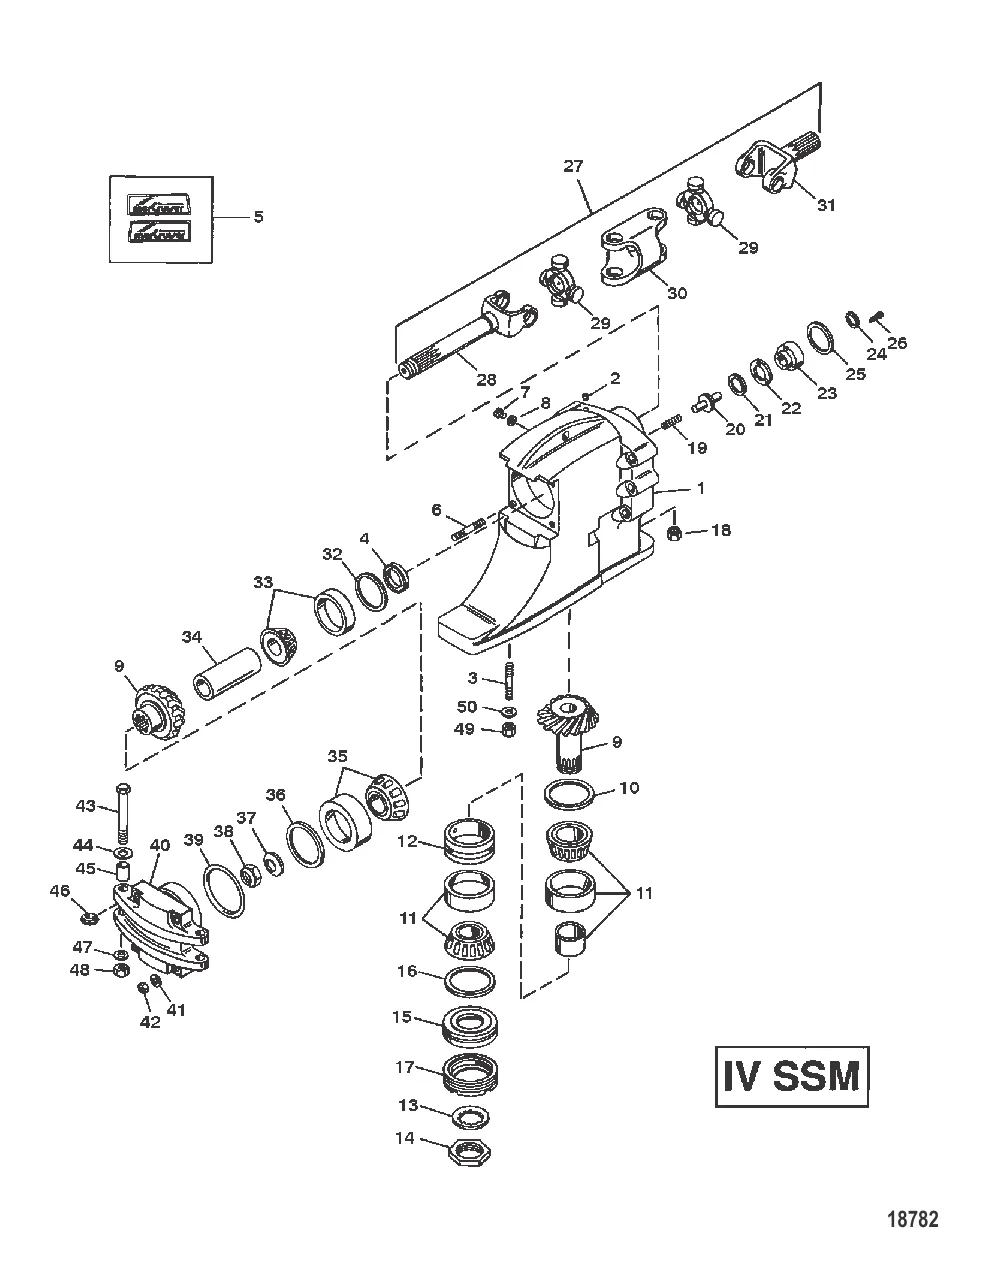 DRIVESHAFT HOUSING AND GEAR ASSEMBLY (IV SSM)